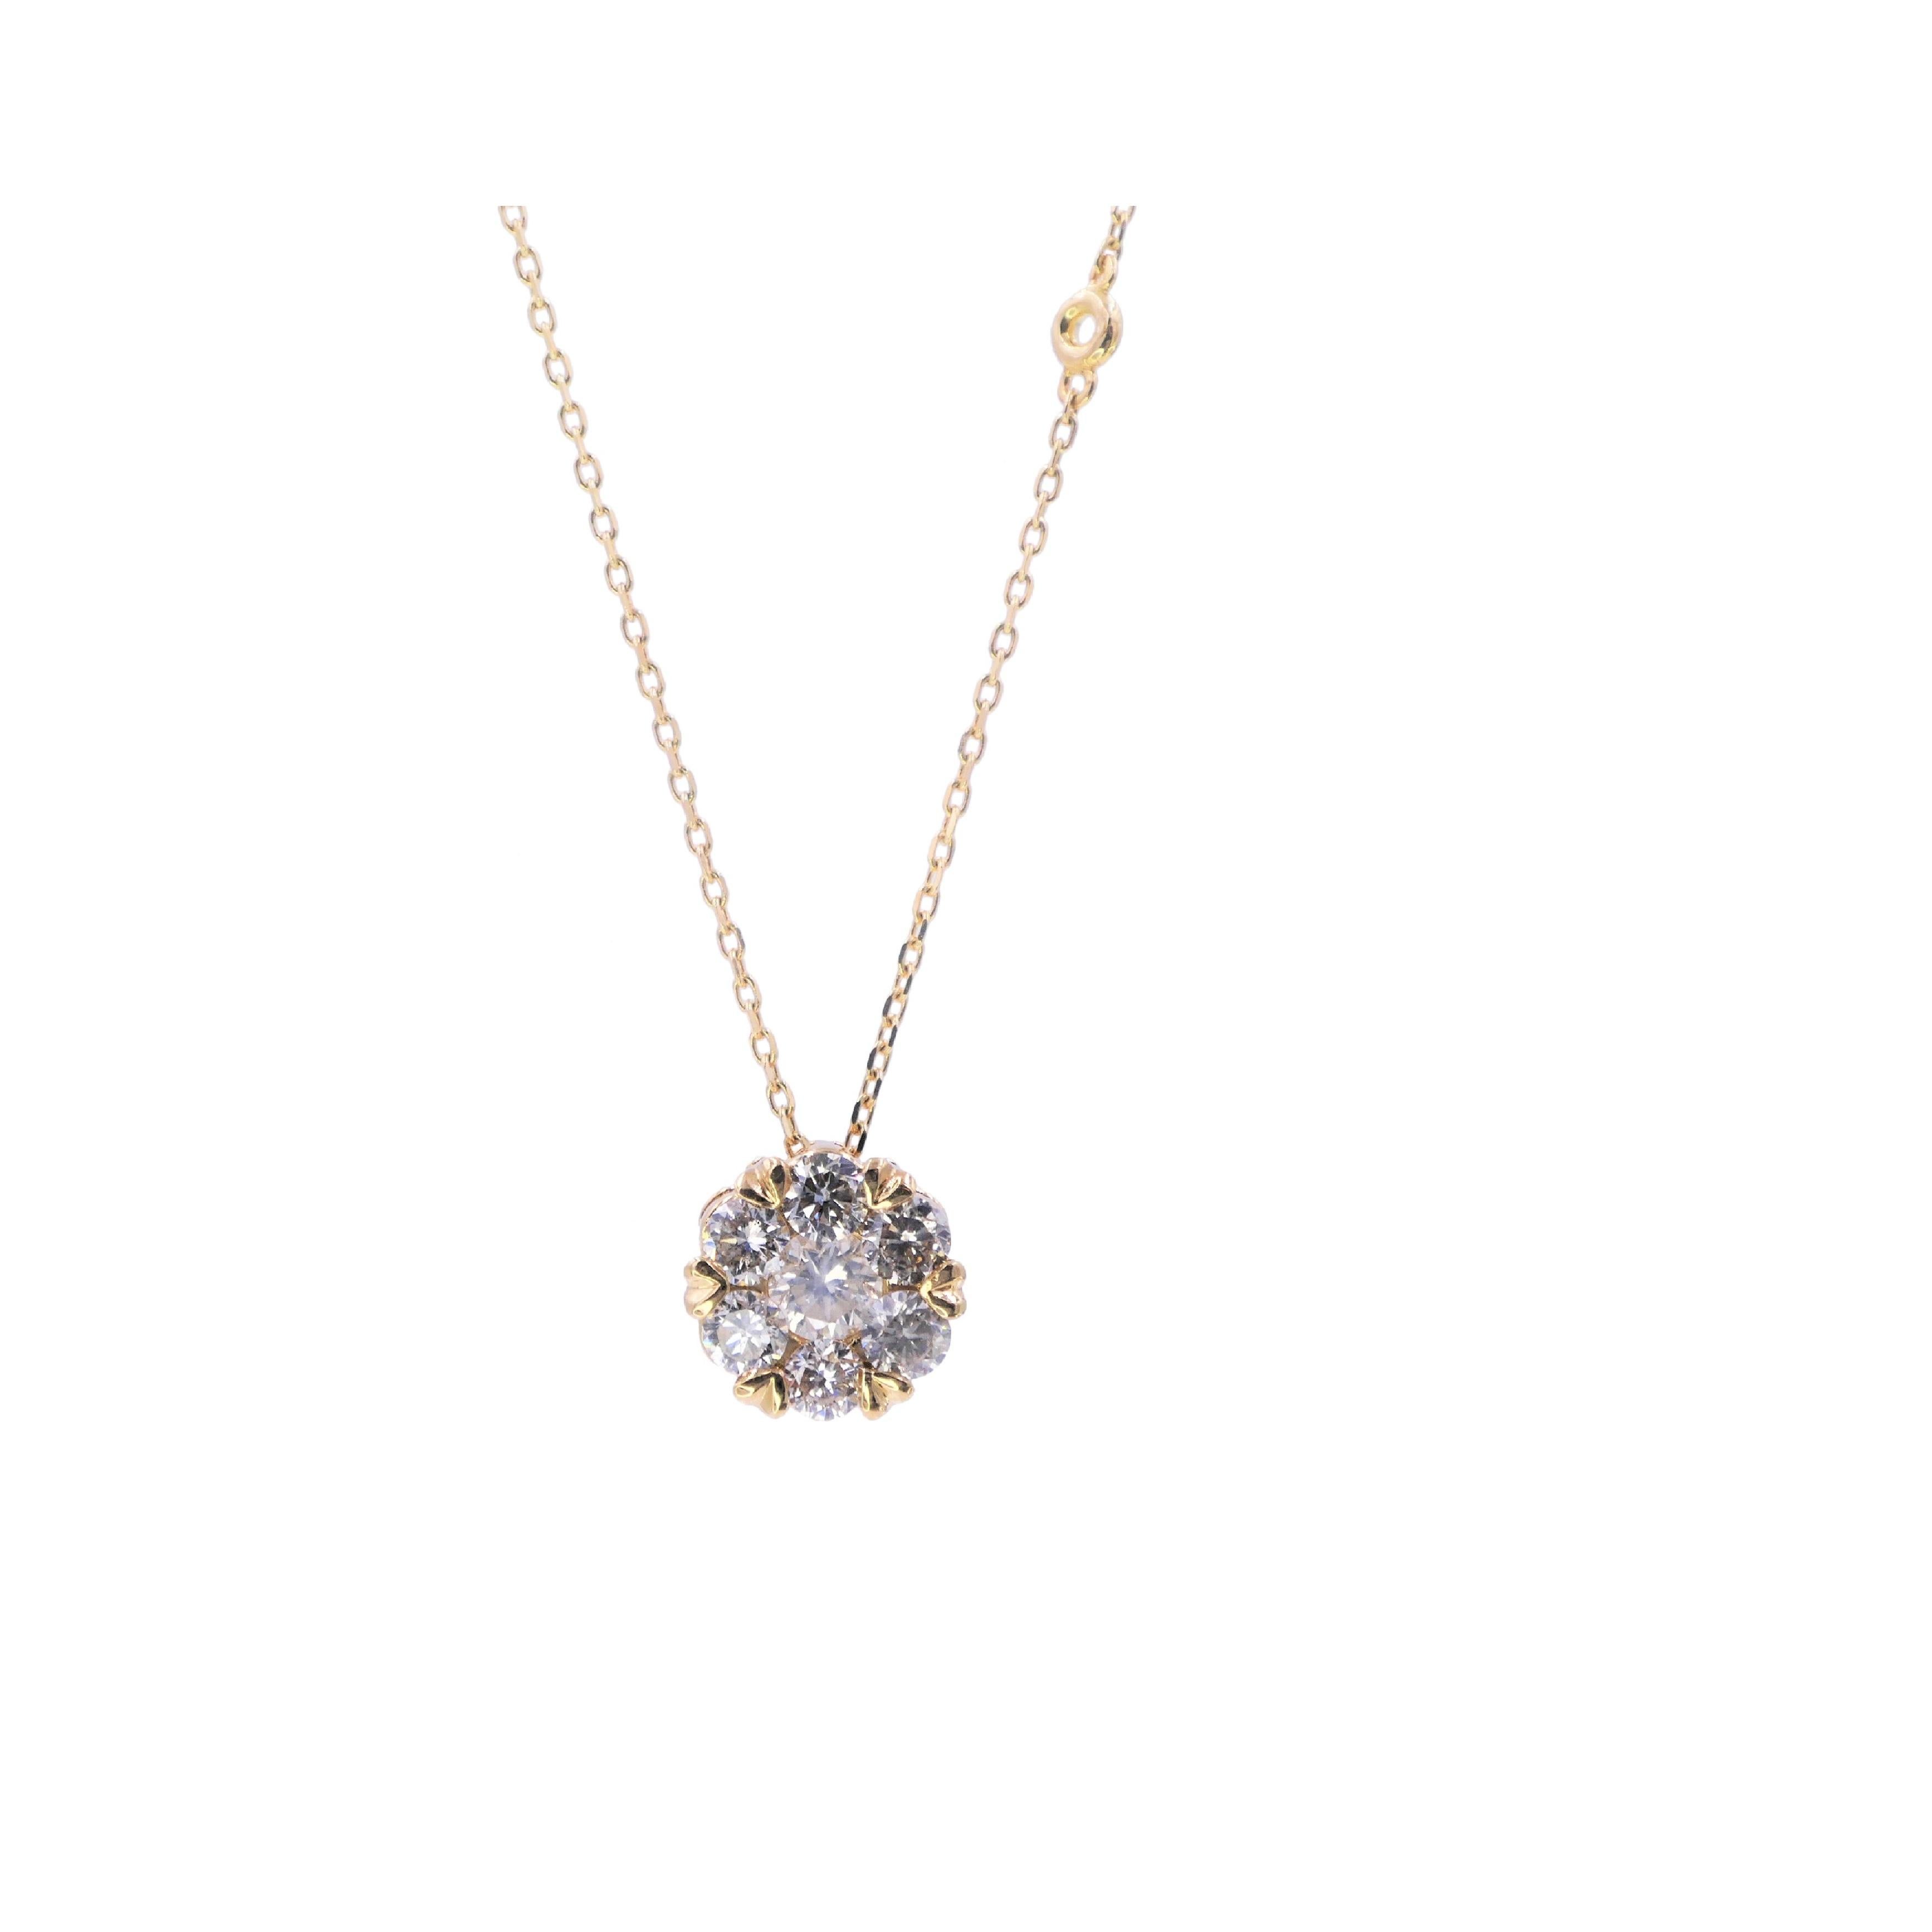 18K Yellow Gold 
1.50 cts Diamonds - Center Diamond is Silvery Grey - Other Diamonds are Warm & Brilliant
18-20 inches adjustable diamond-cut cable chain